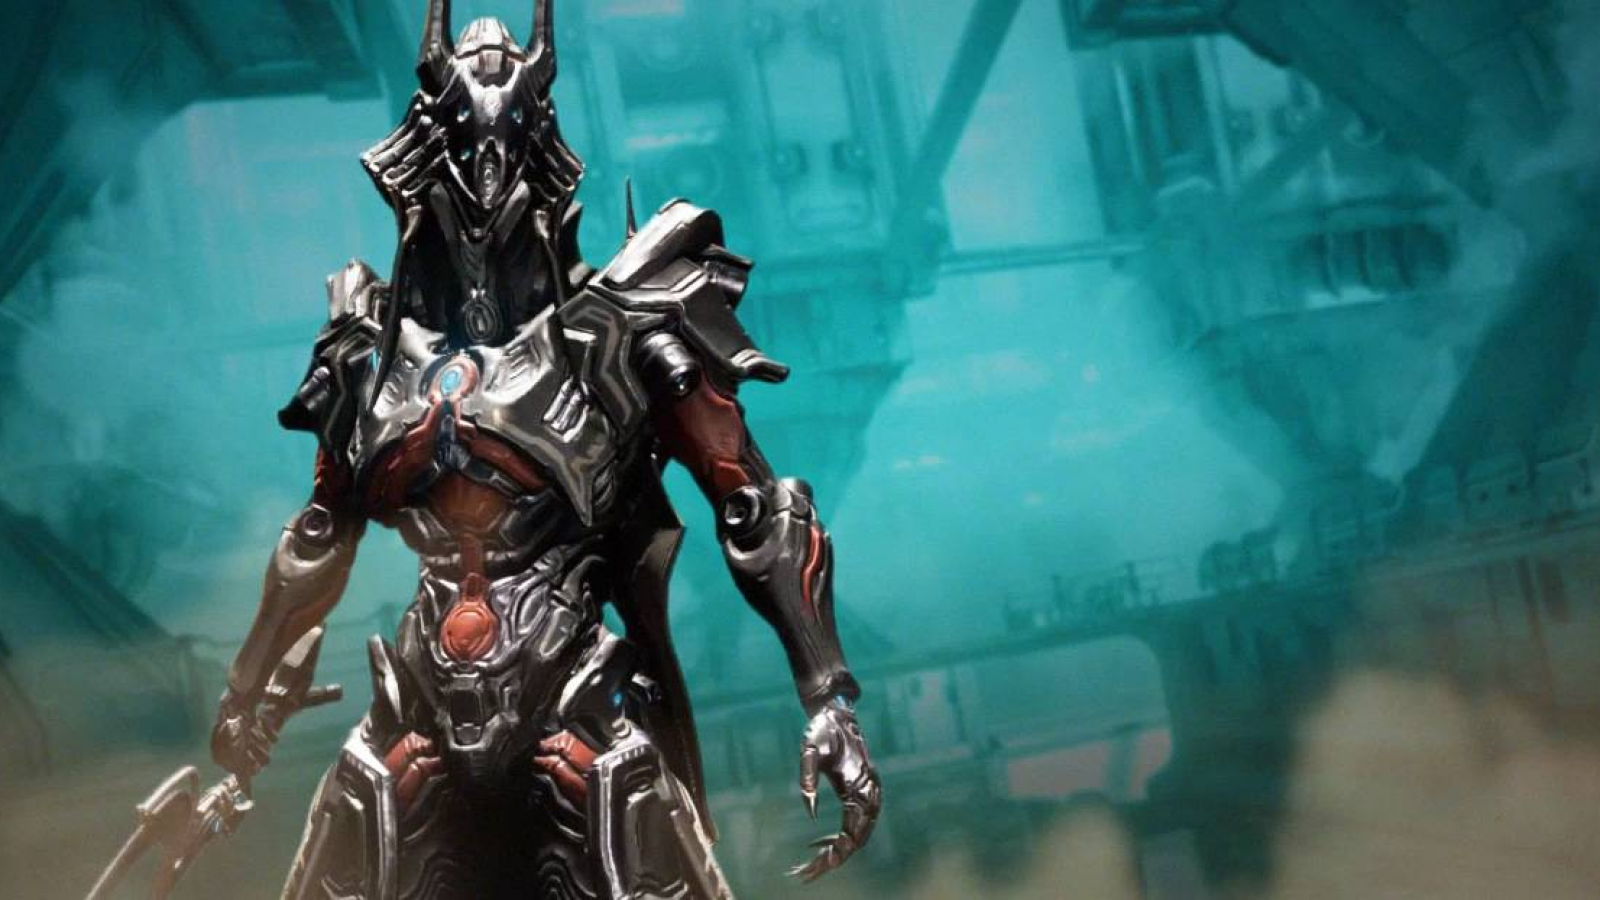 INAROS RAMSES SKIN AVAILABLE NOW